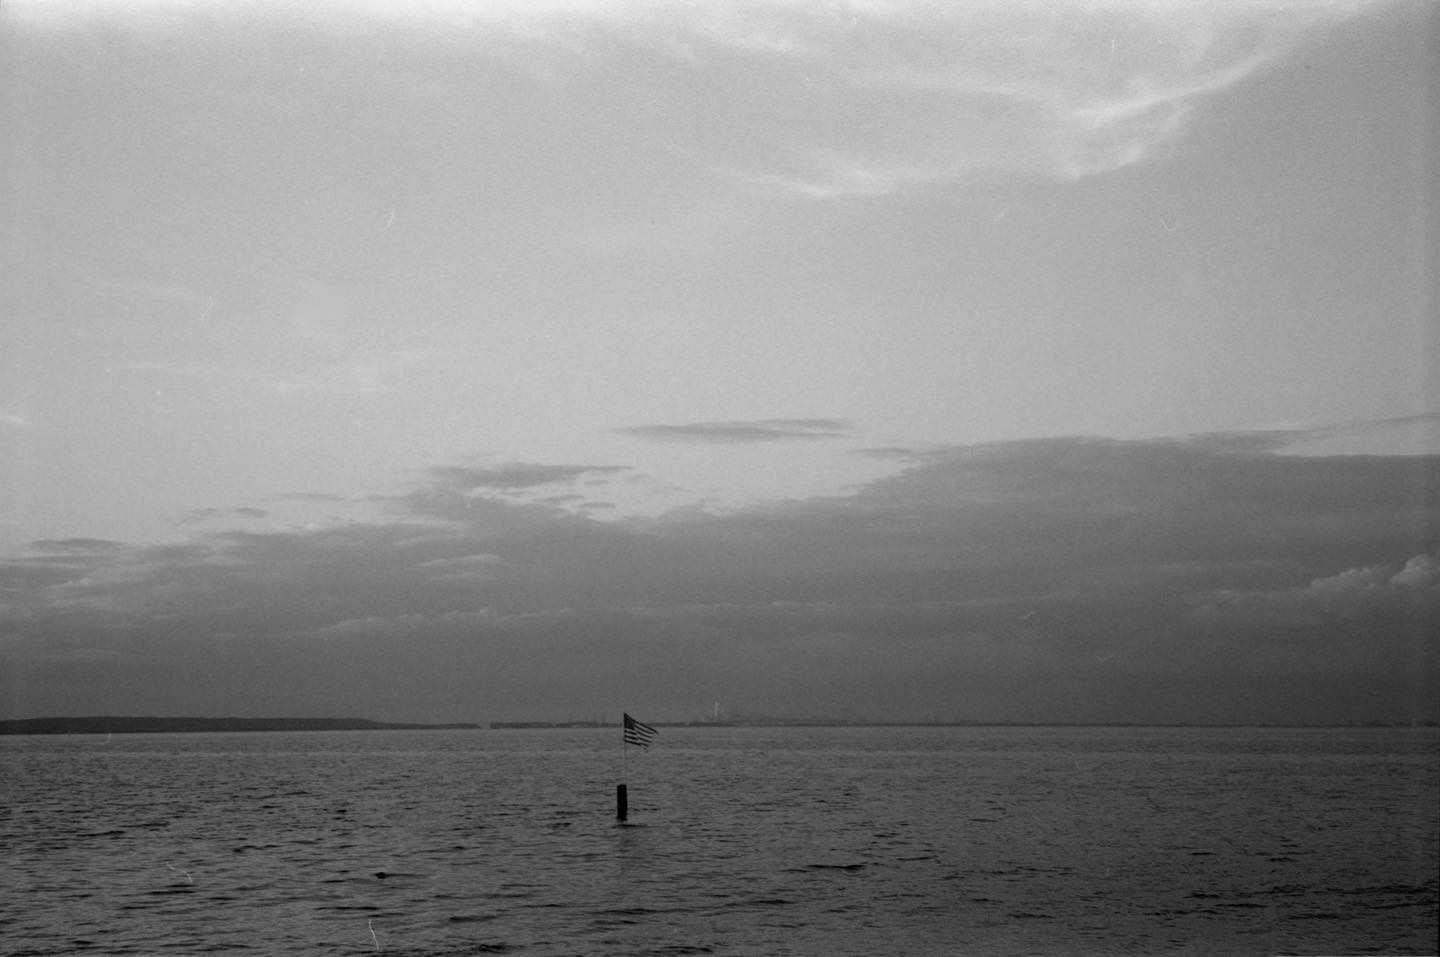 Bay

Raritan Bay, looking toward New York City in the distance from Ideal Beach. This looks better on Flickr, where you can look at it large and actually see the city. #contaxiii #orwoun54 #rodinal #film #filmphotography #rollfilmweek #rollfilmweek2020  Day 2, 1/2.